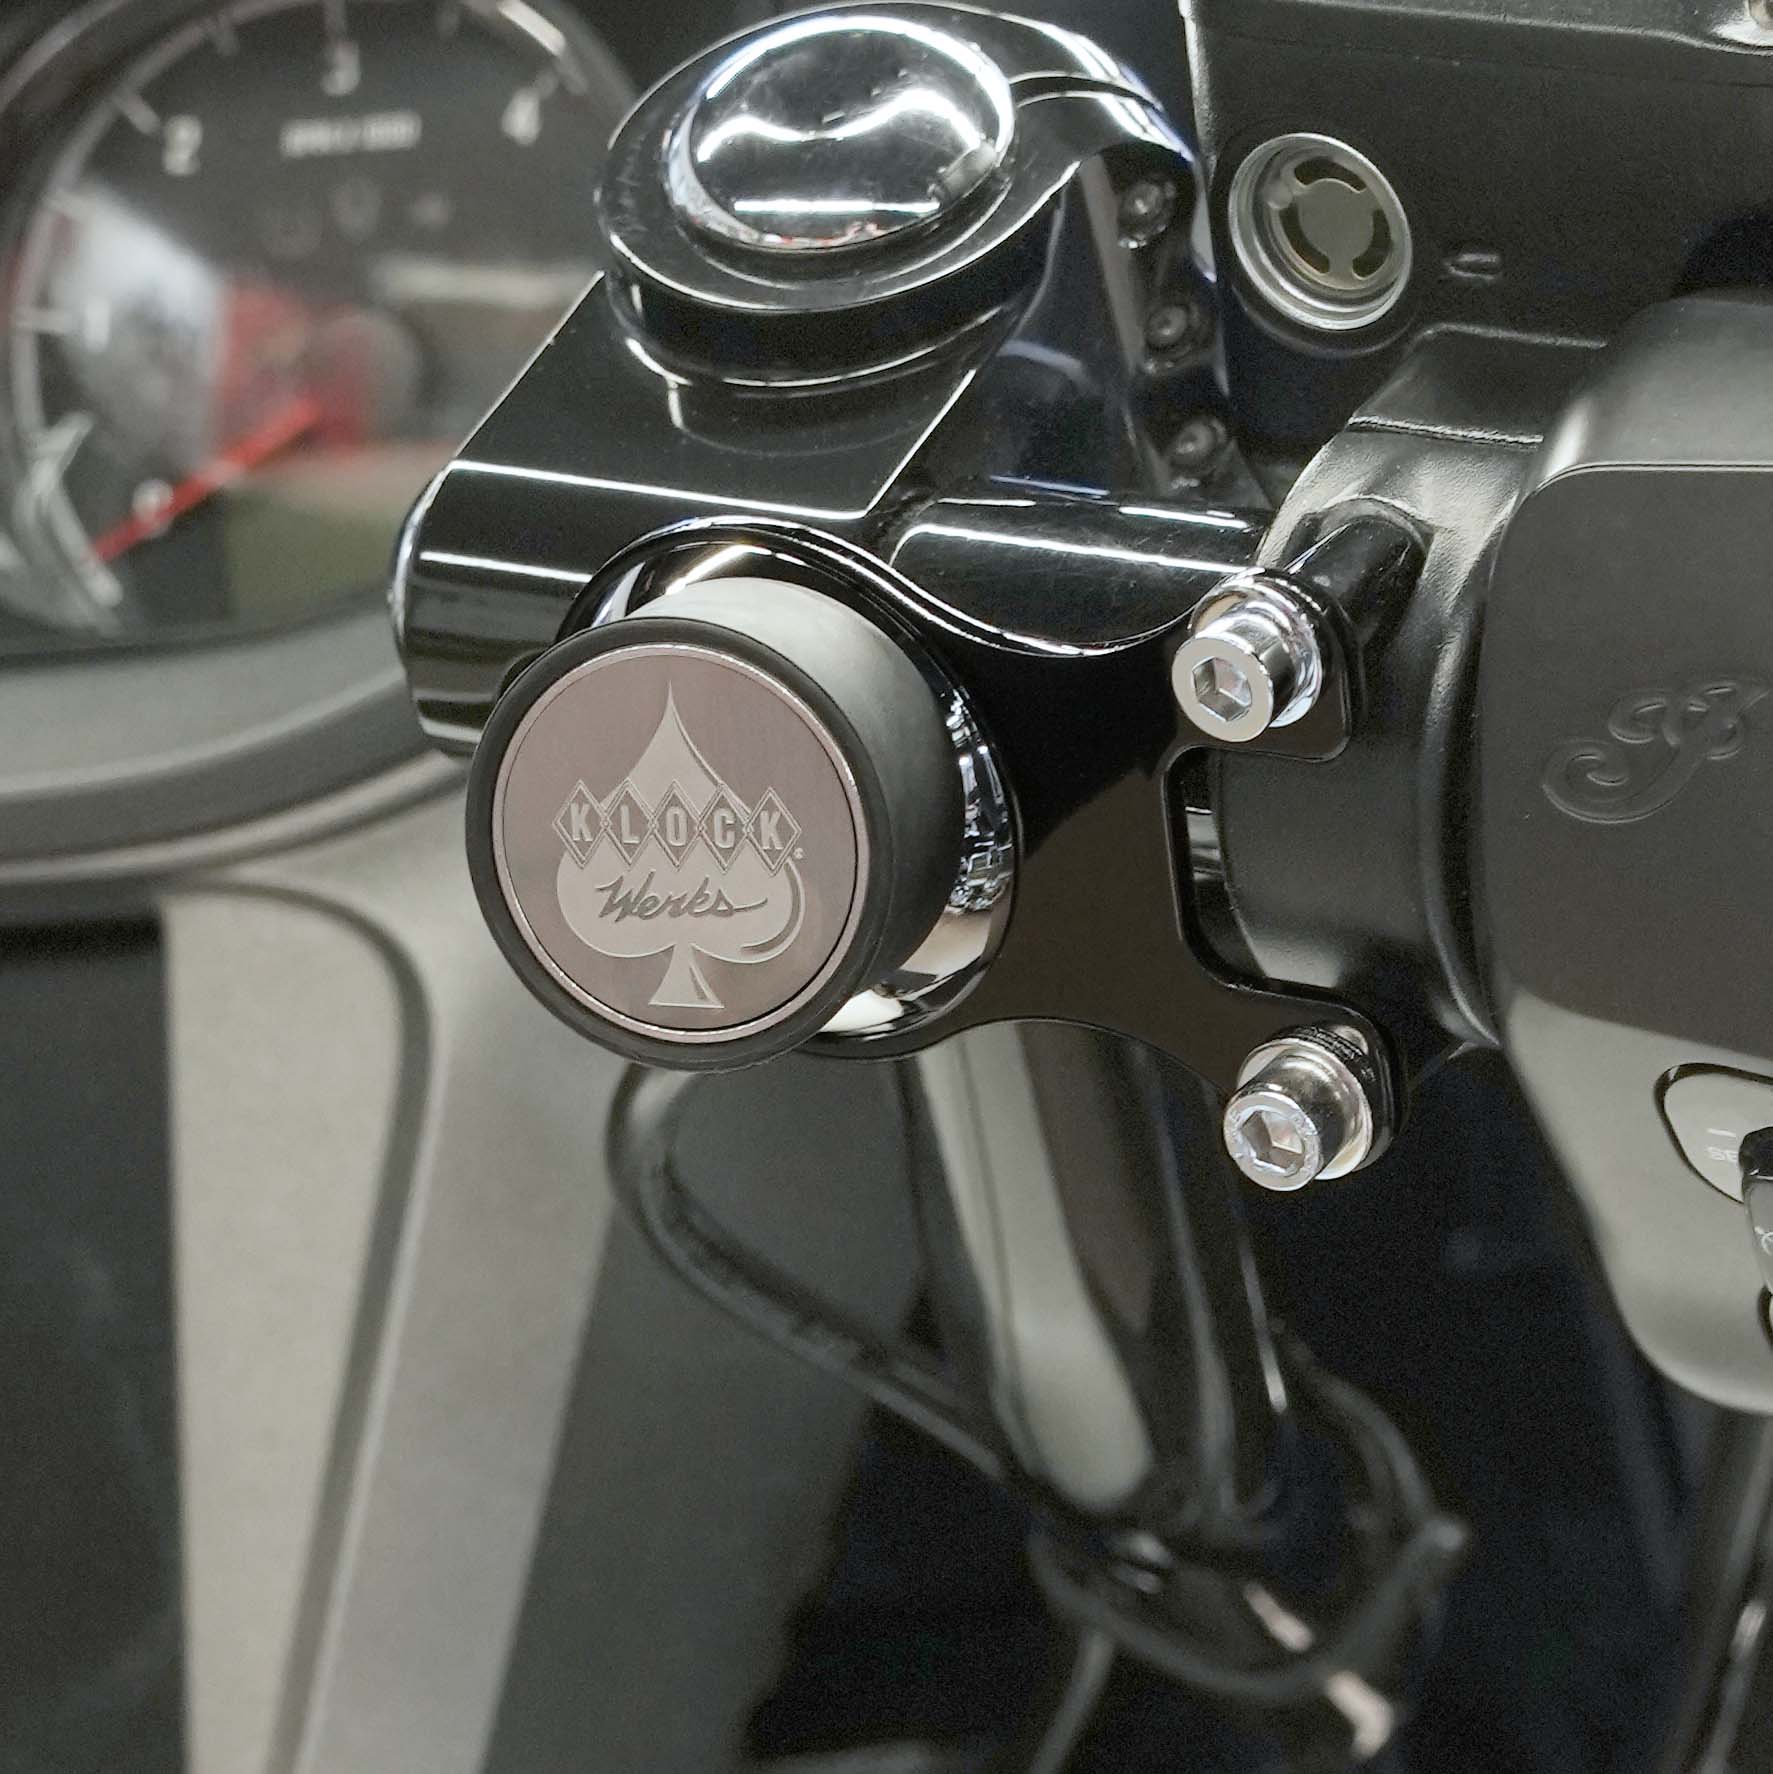 Black Ambidextrous Handlebar Magnetic Phone Mount for Indian® Challenger and Pursuit Motorcycles shown on bike(Black Ambidextrous Mount on bike)